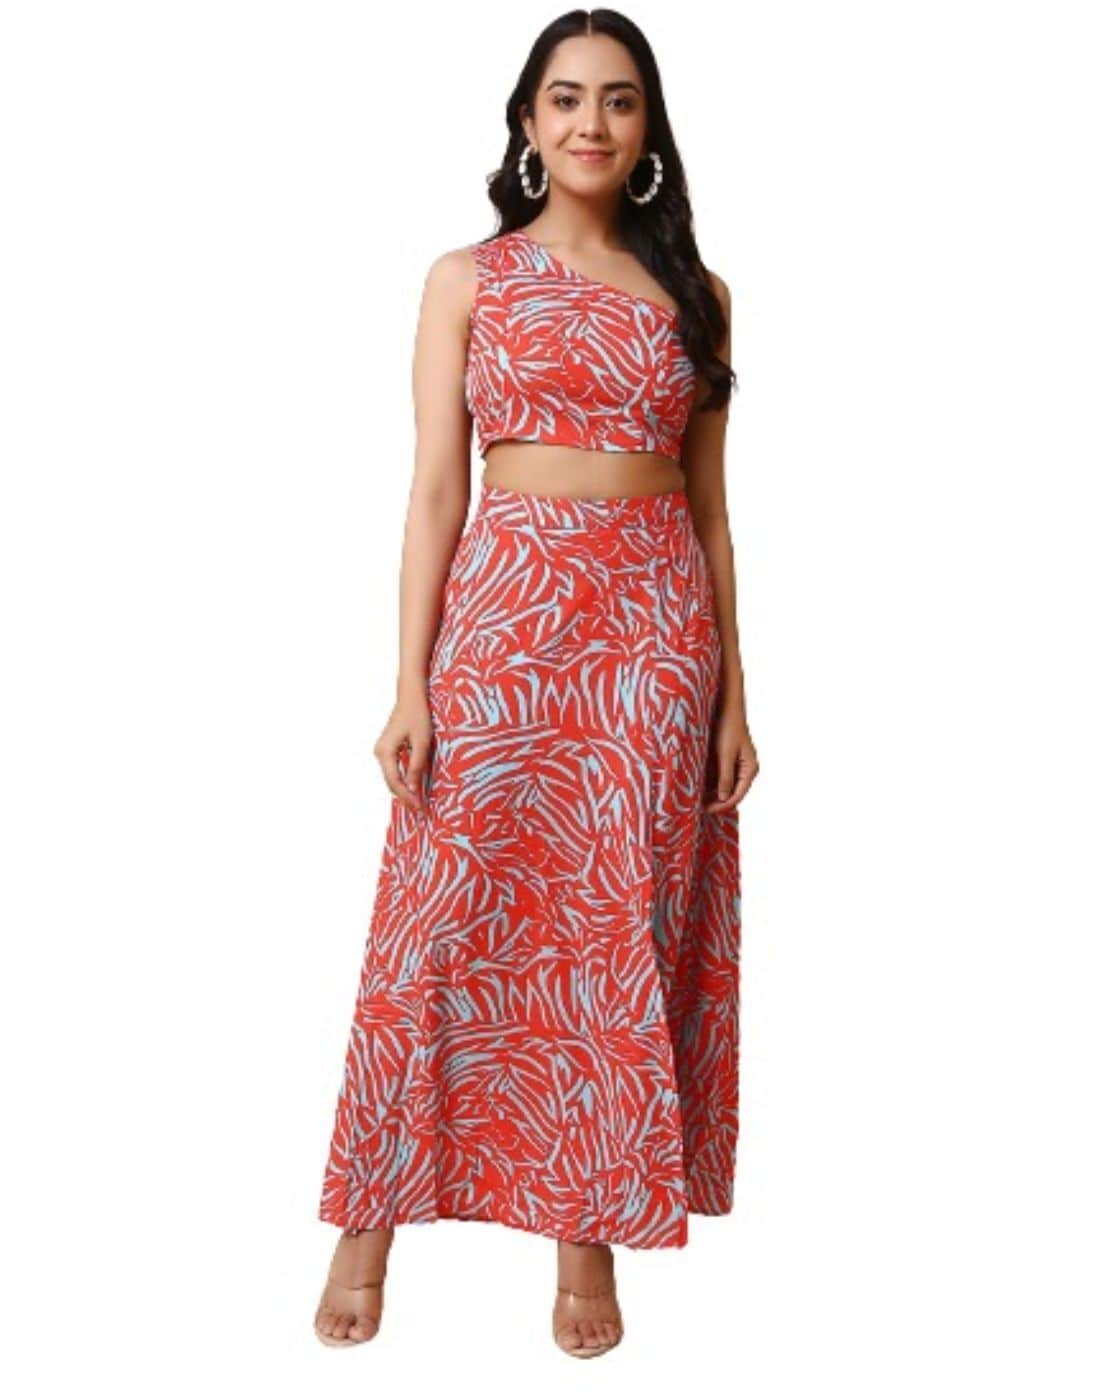 White/Black Crop Top Skirt Set – The Indian Cause